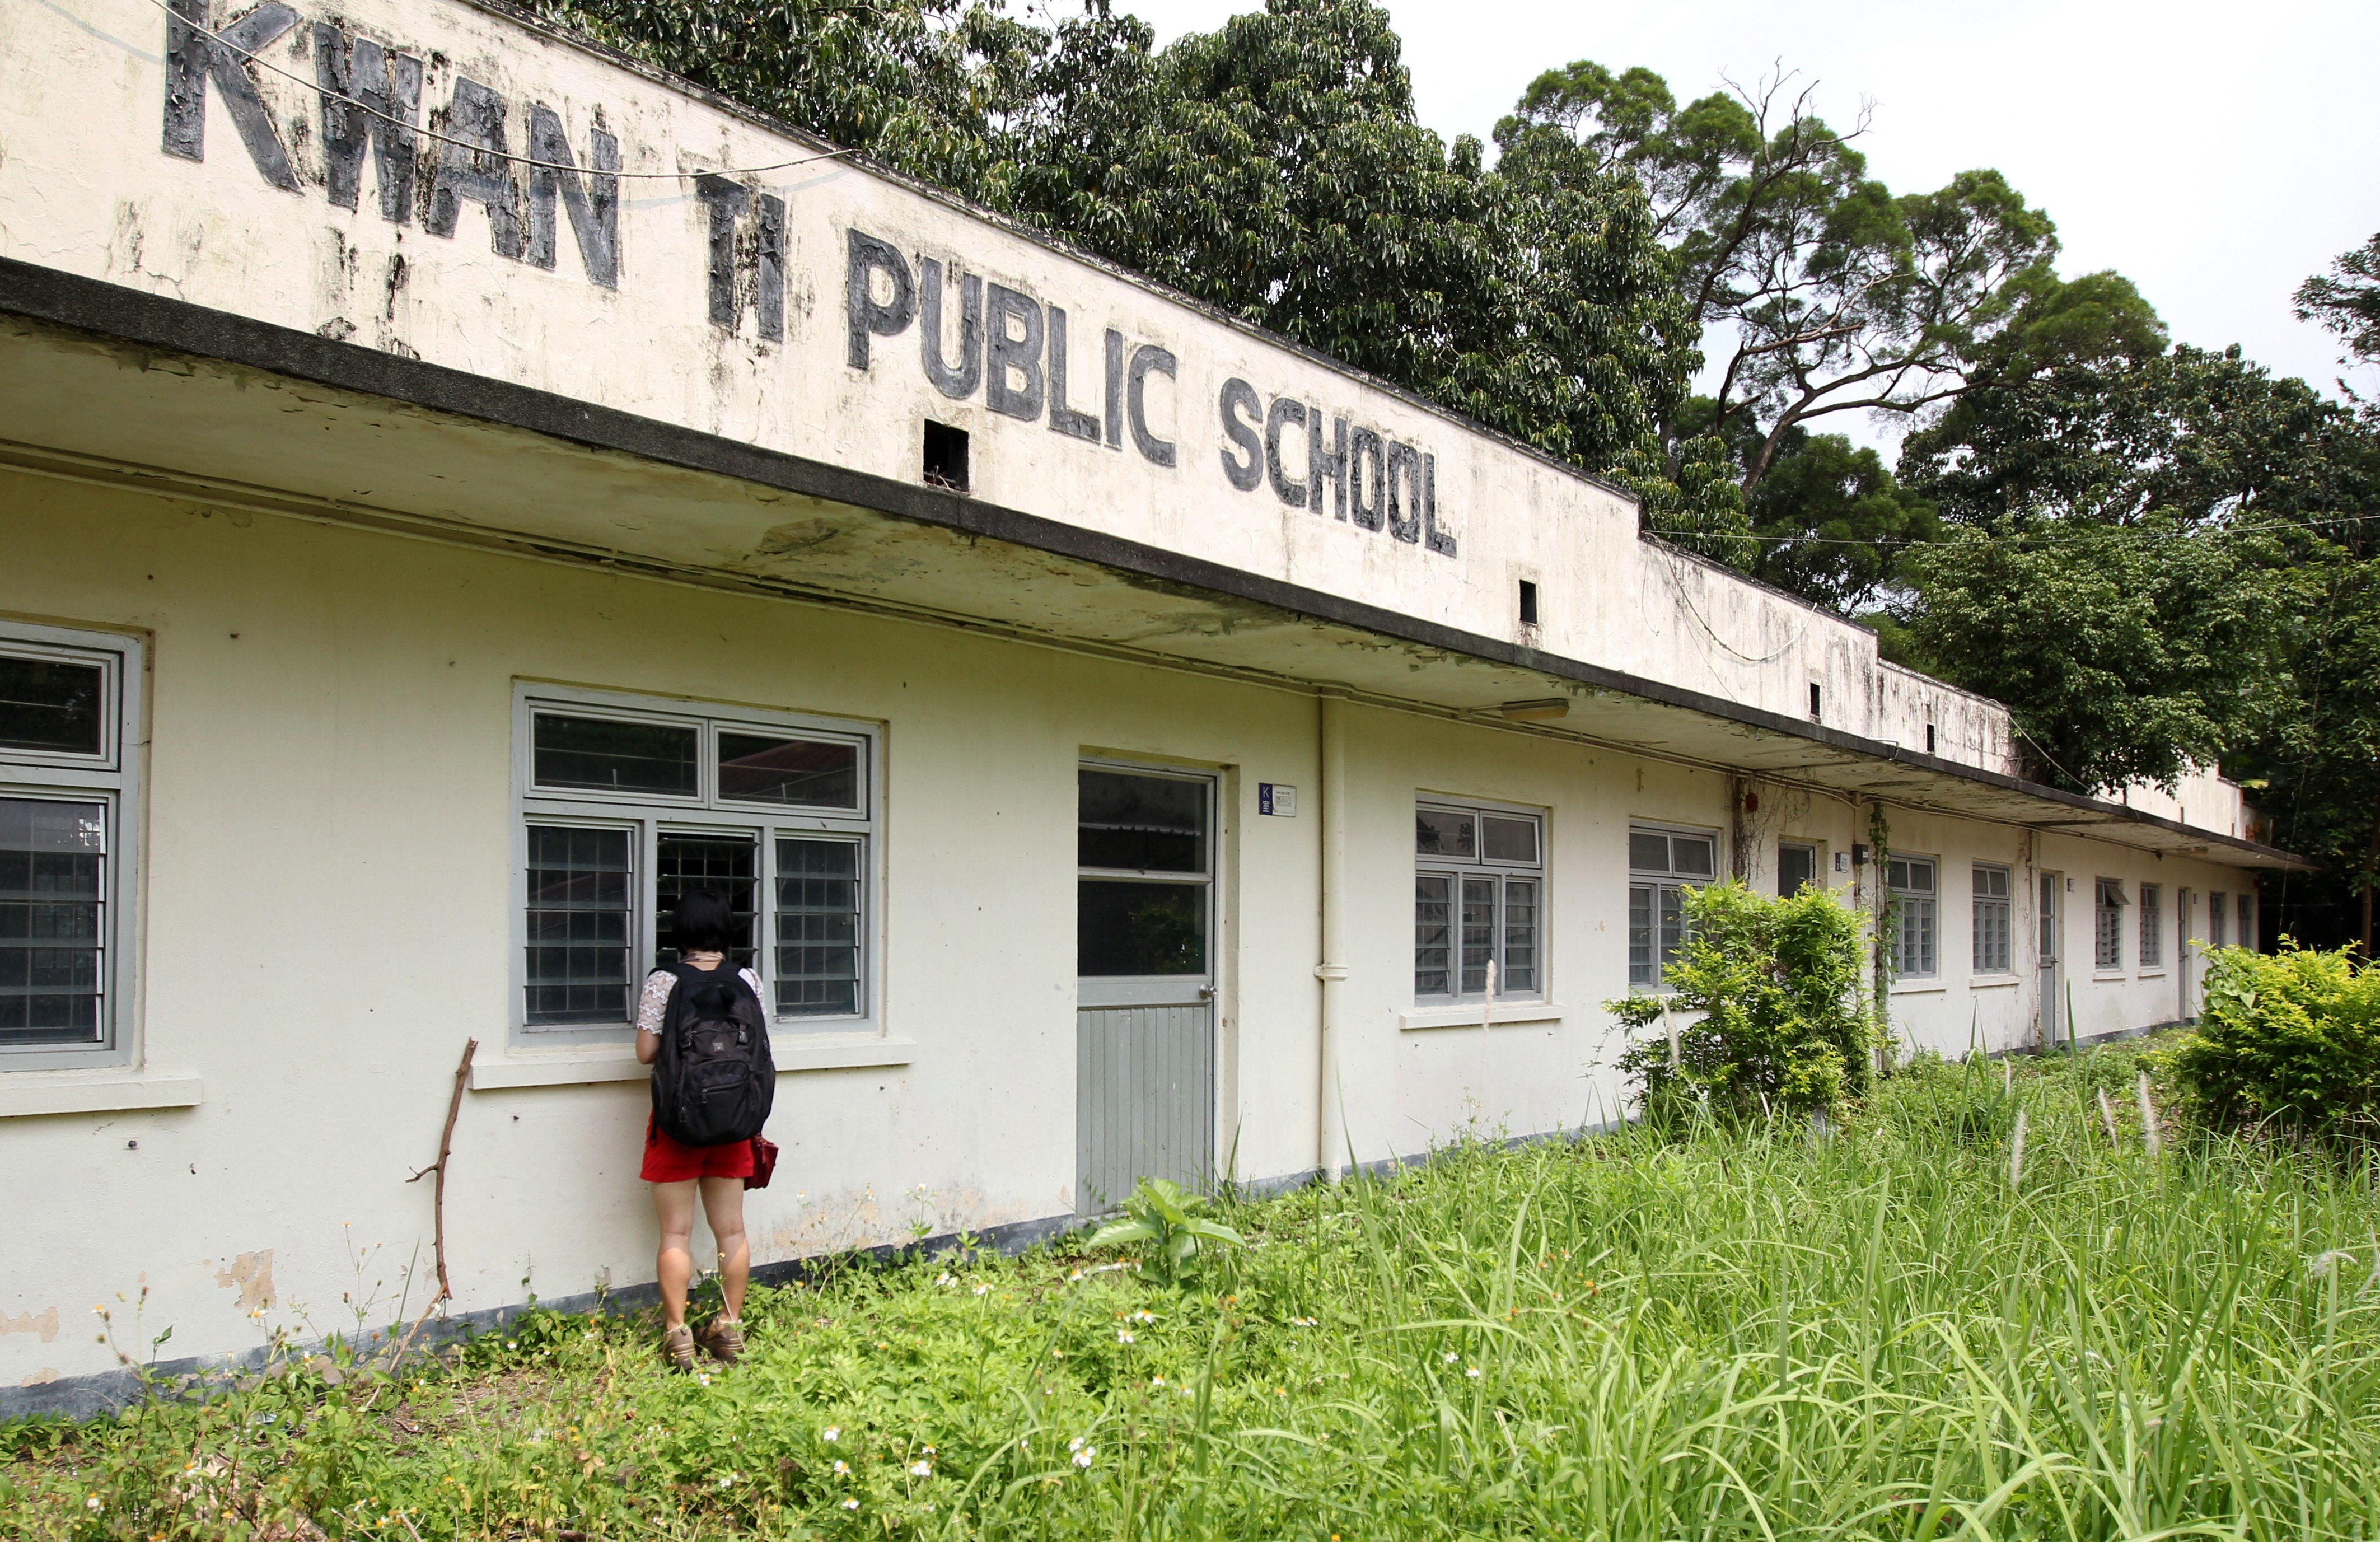 Kwan Ti Public School in Fanlight was closed in 2004 and has been left vacant since. Photo: Dickson Lee